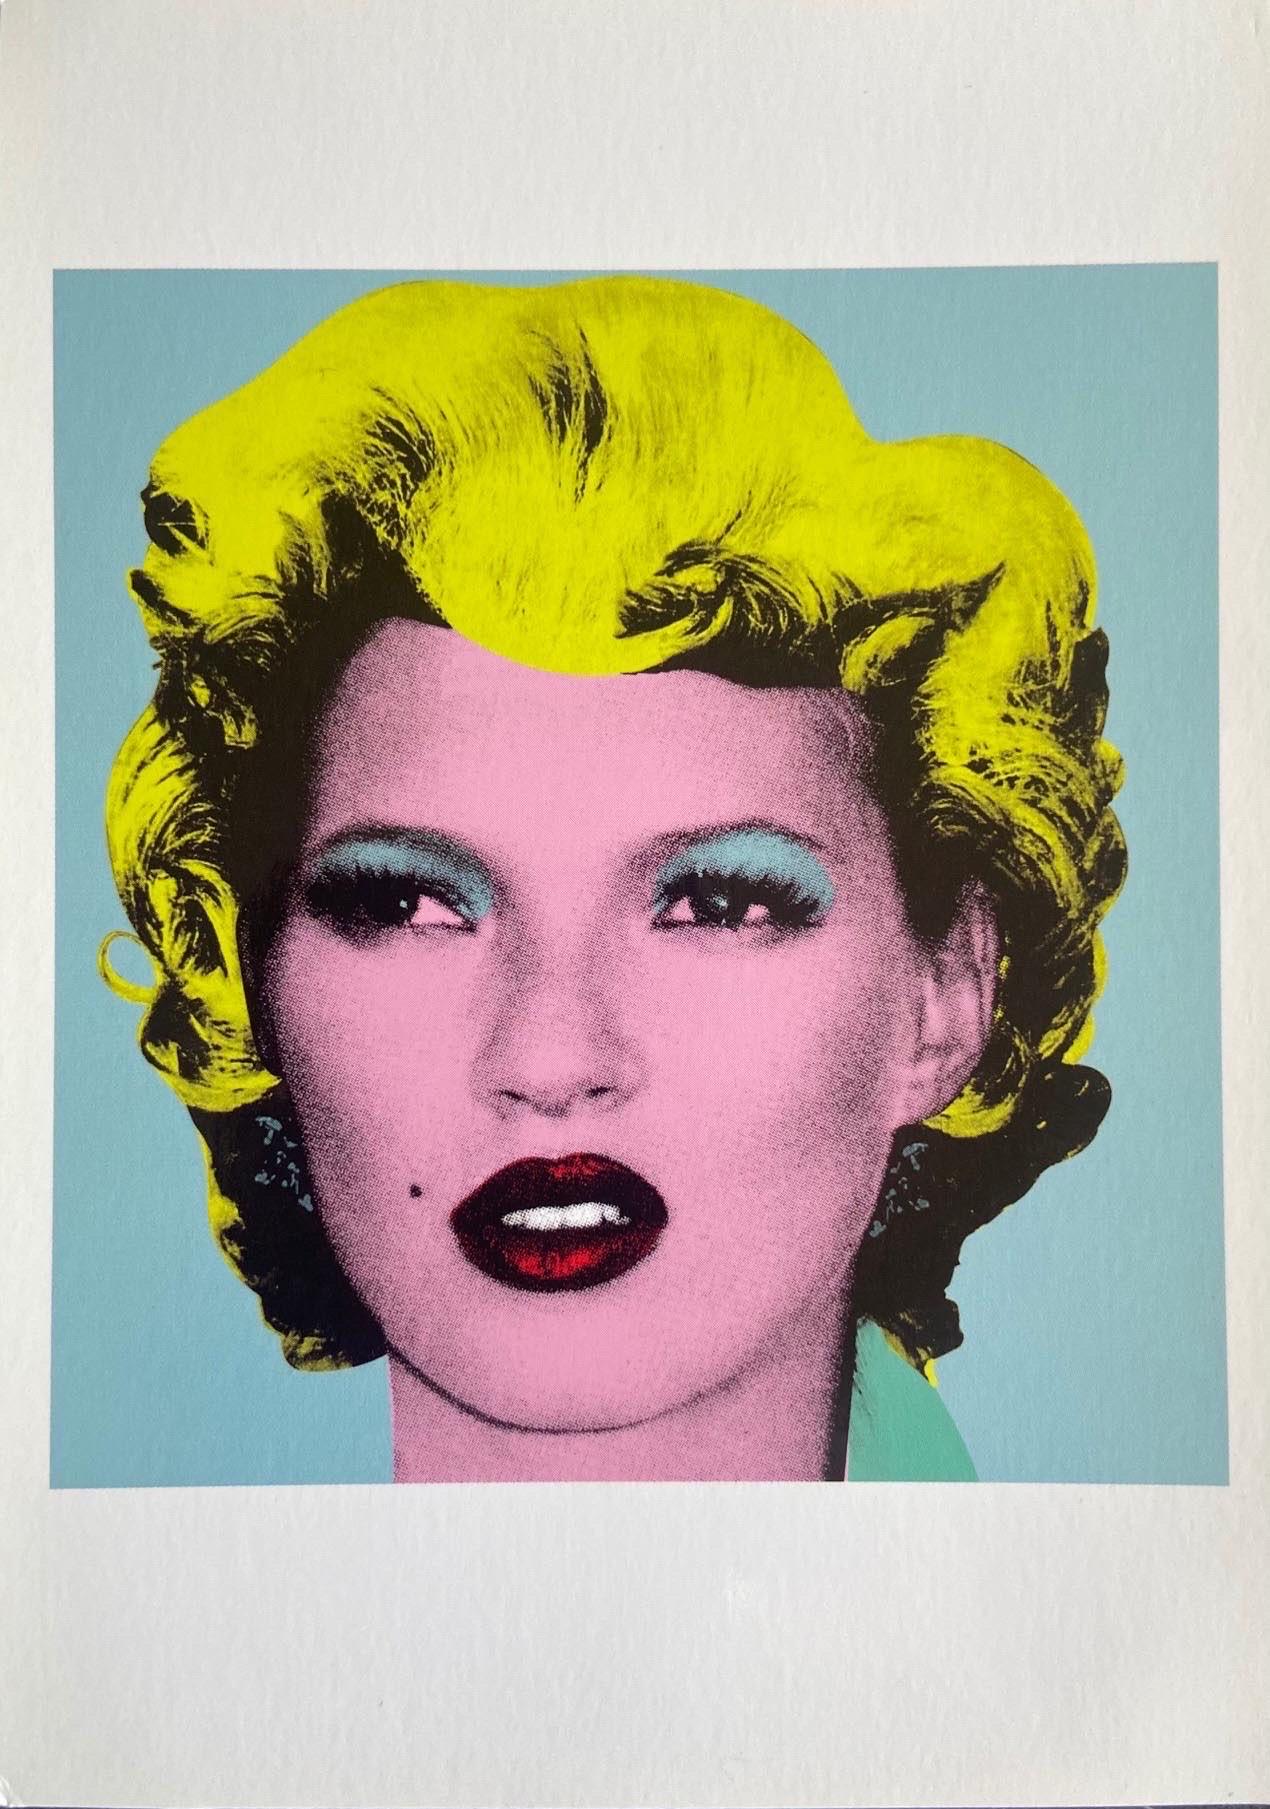 Banksy, Kate Moss Postcard, 2005

Offset Lithograph on postcard

10 x 15 cm  (3.93 x 5.90 in) 

Crude Oils invitation postcard 

A rare Kate Moss postcard originally released in 2005 for Banksy's Crude Oils exhibition of remixed masterpieces.